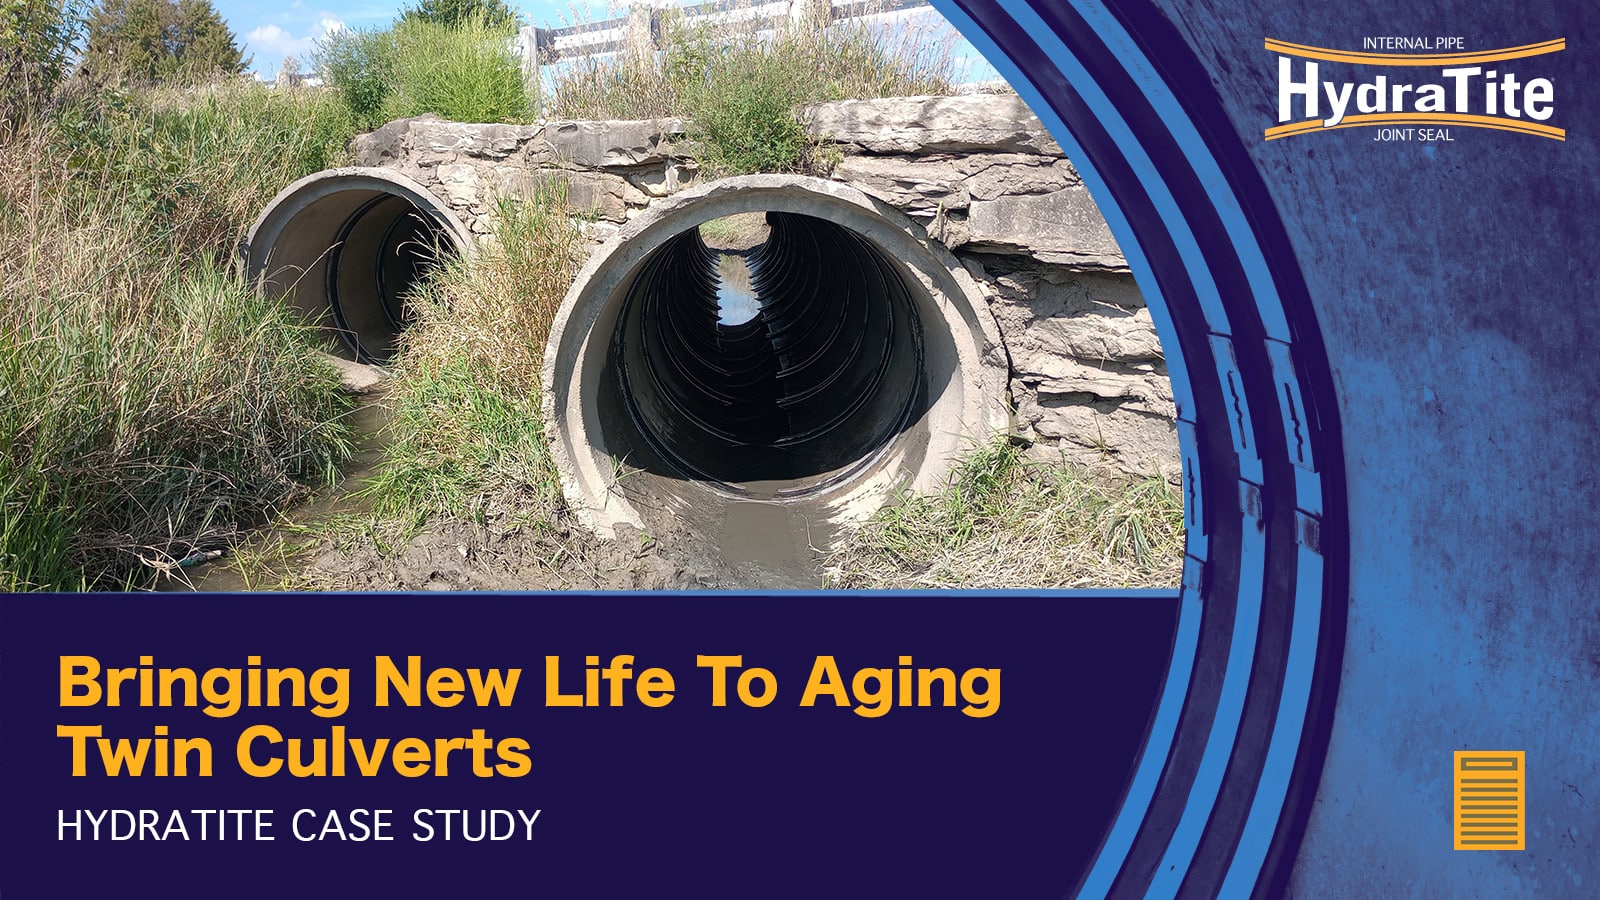 Dam overflow pipe that has been rehabilitated with HydraTite, 'Sealing A Dam Overflow Pipe, HydraTite Case Study'